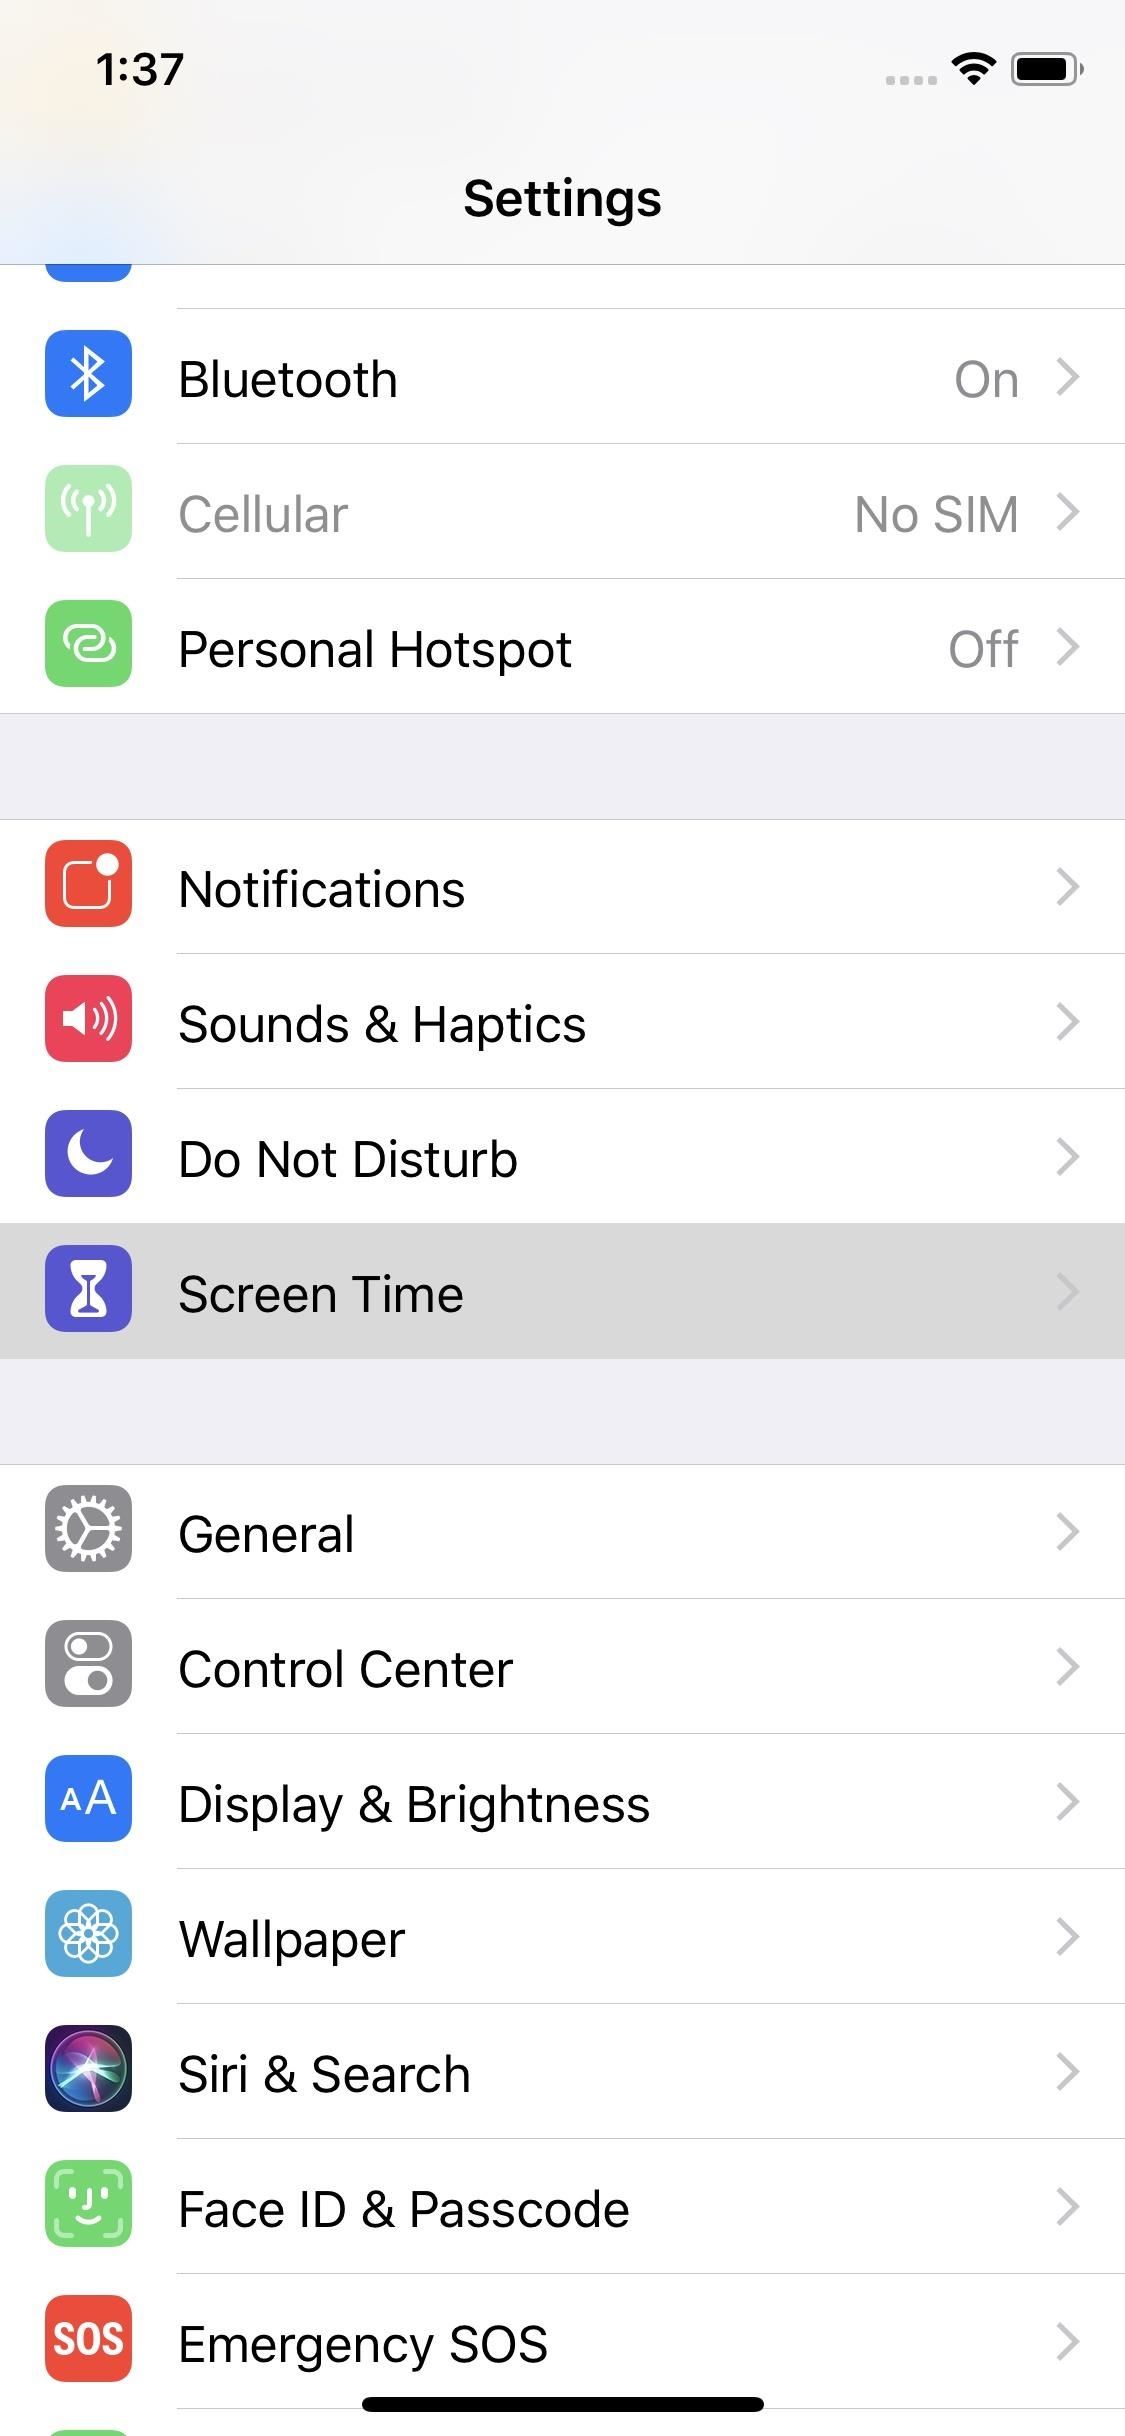 How to Use iOS 12's 'Digital Health' Features to Keep Your iPhone Usage in Check & Limit Interruptions